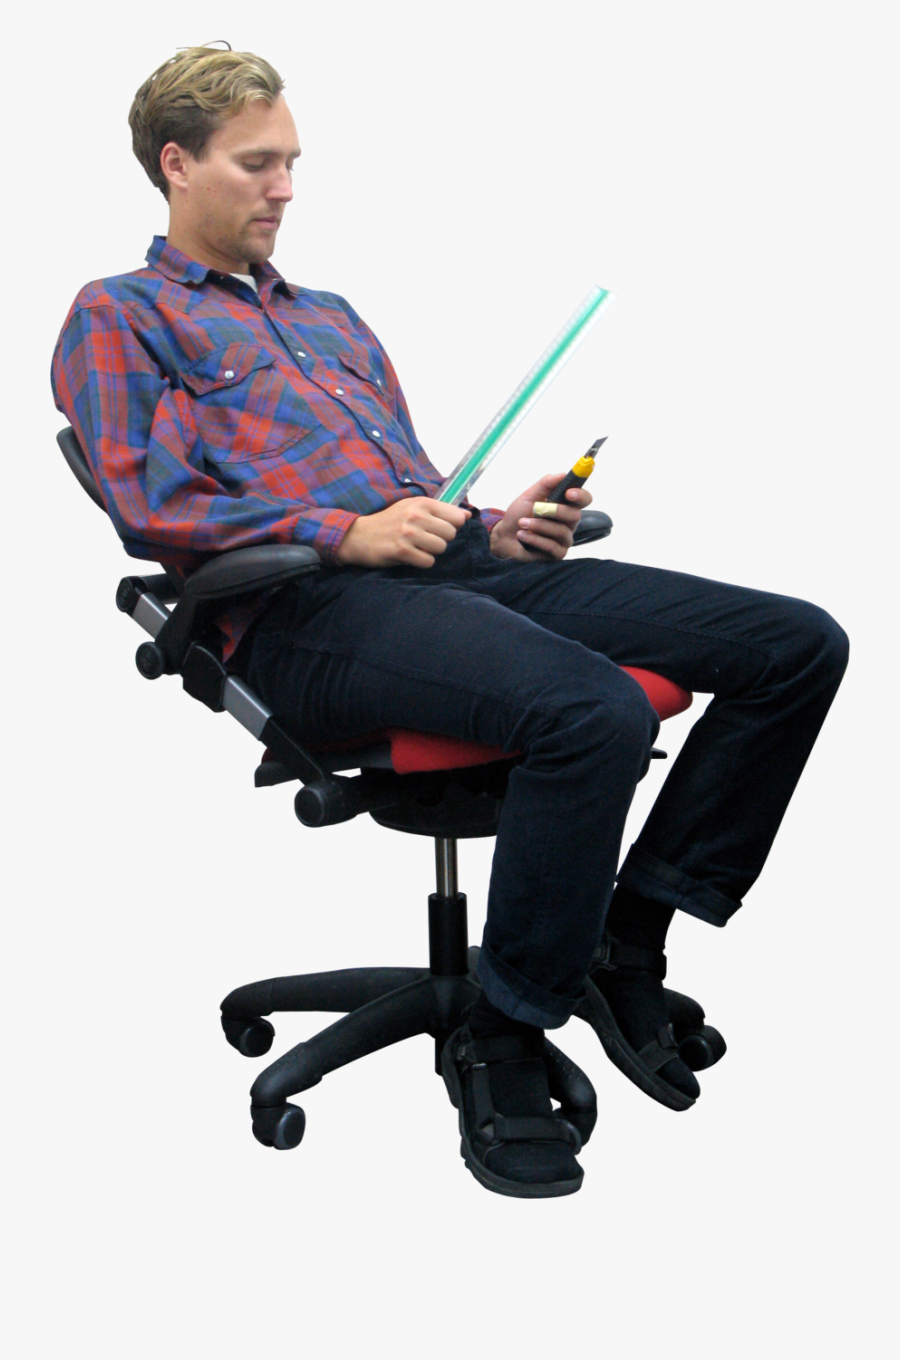 Office - People - Images - Sitting On Chair Transparent, Transparent Clipart